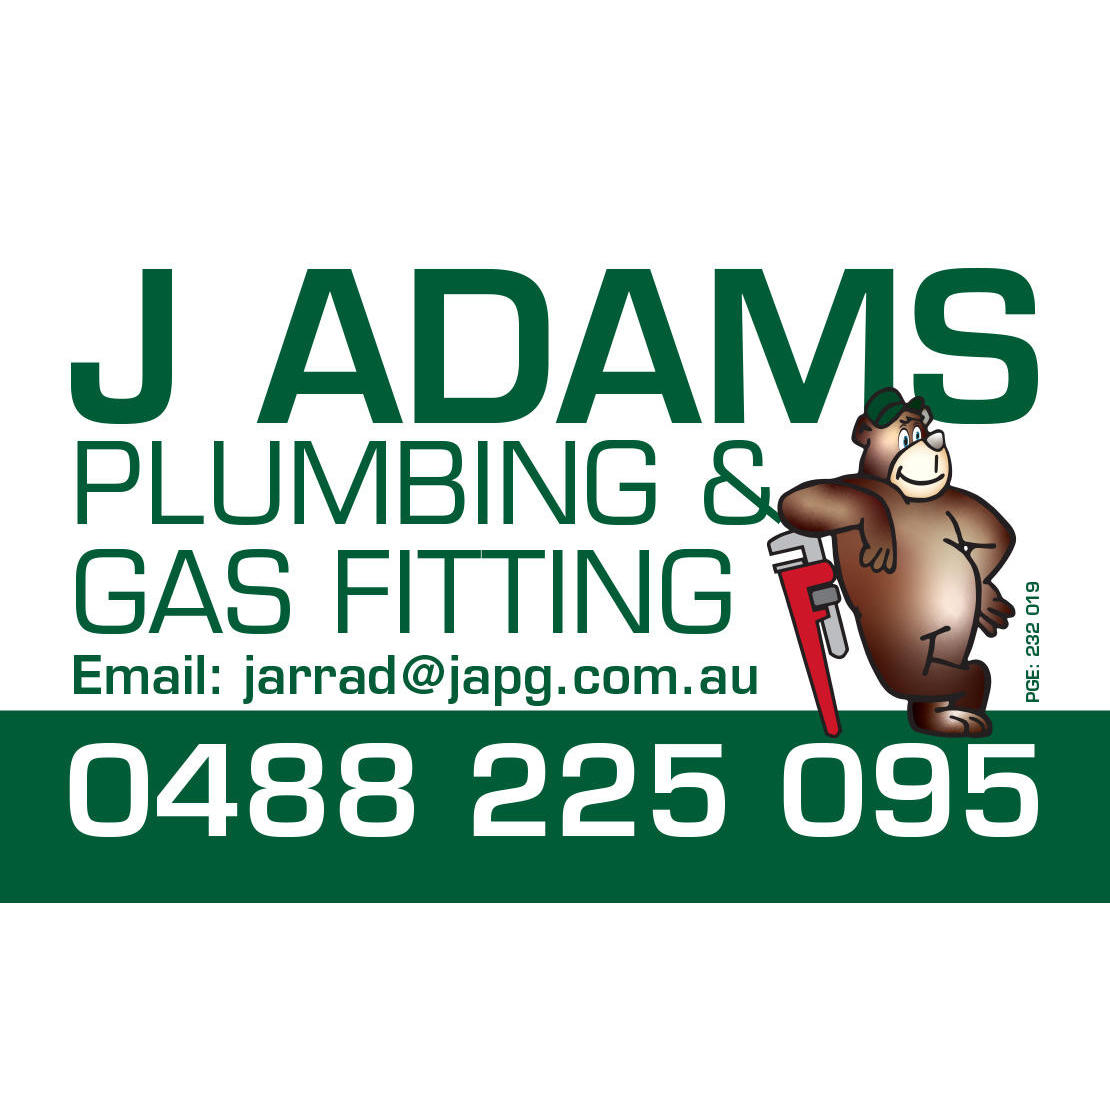 J Adams Plumbing and Gas Fitting - Port Pirie West, SA - 0488 225 095 | ShowMeLocal.com